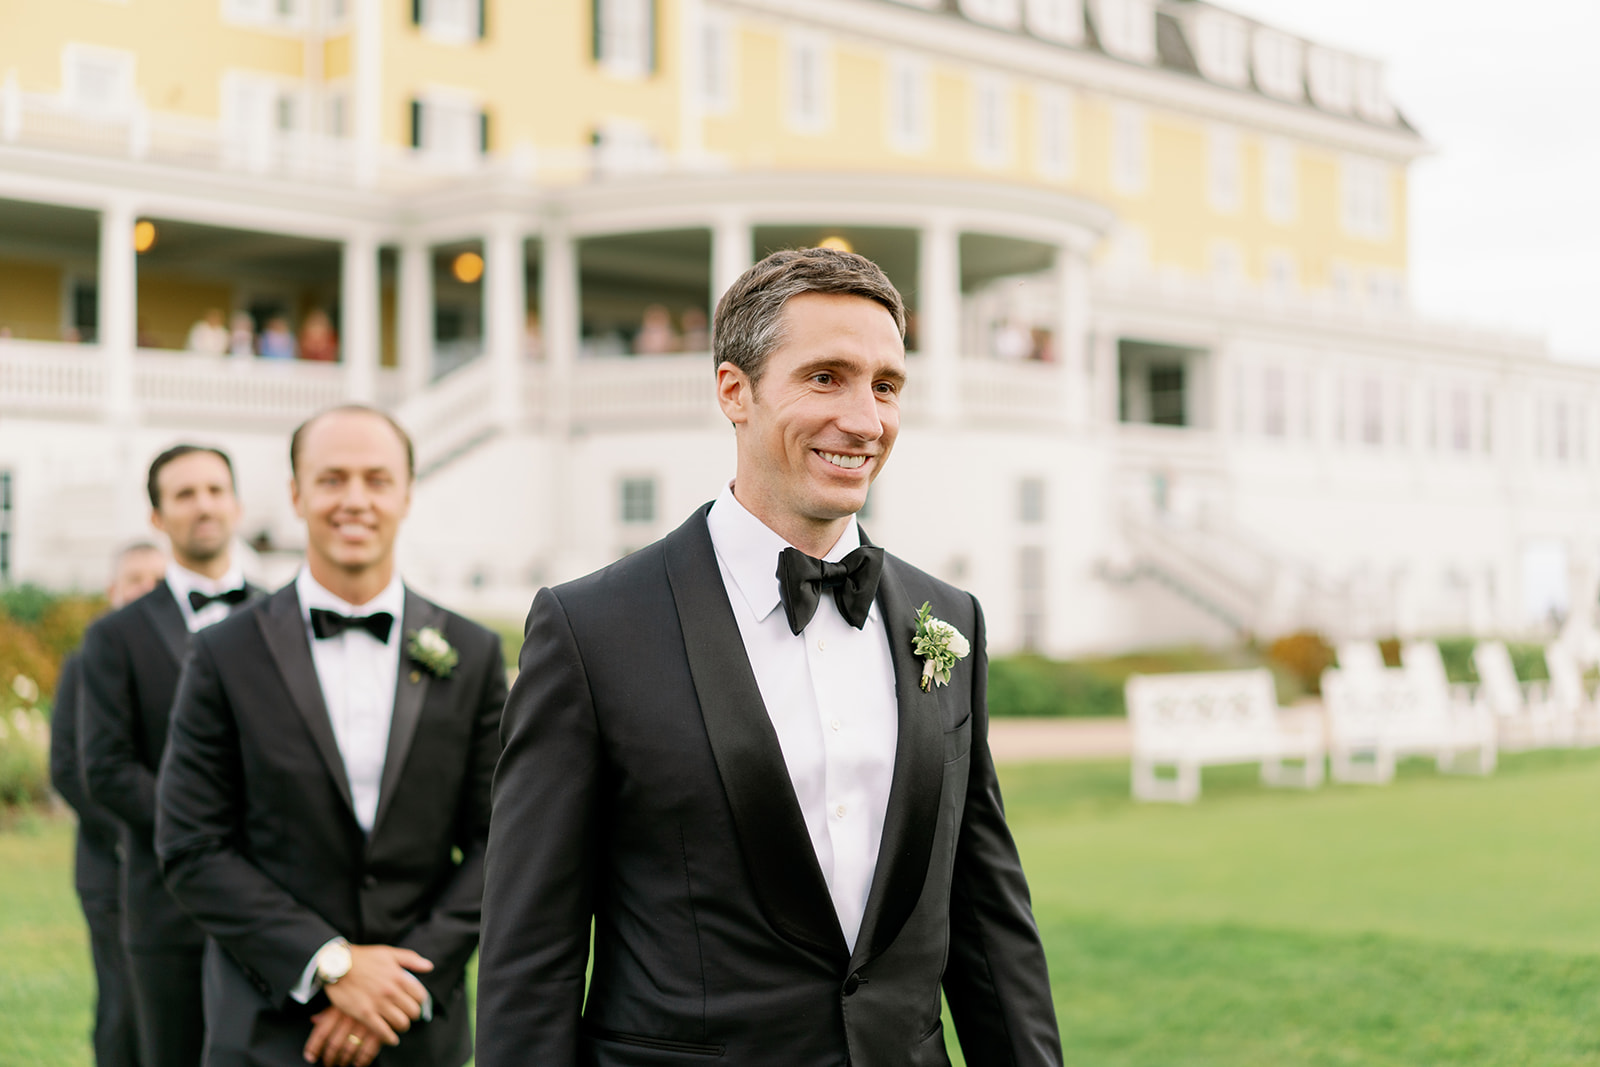 Groom and groomsmen processional on the lawn of Ocean House in Rhode Island.